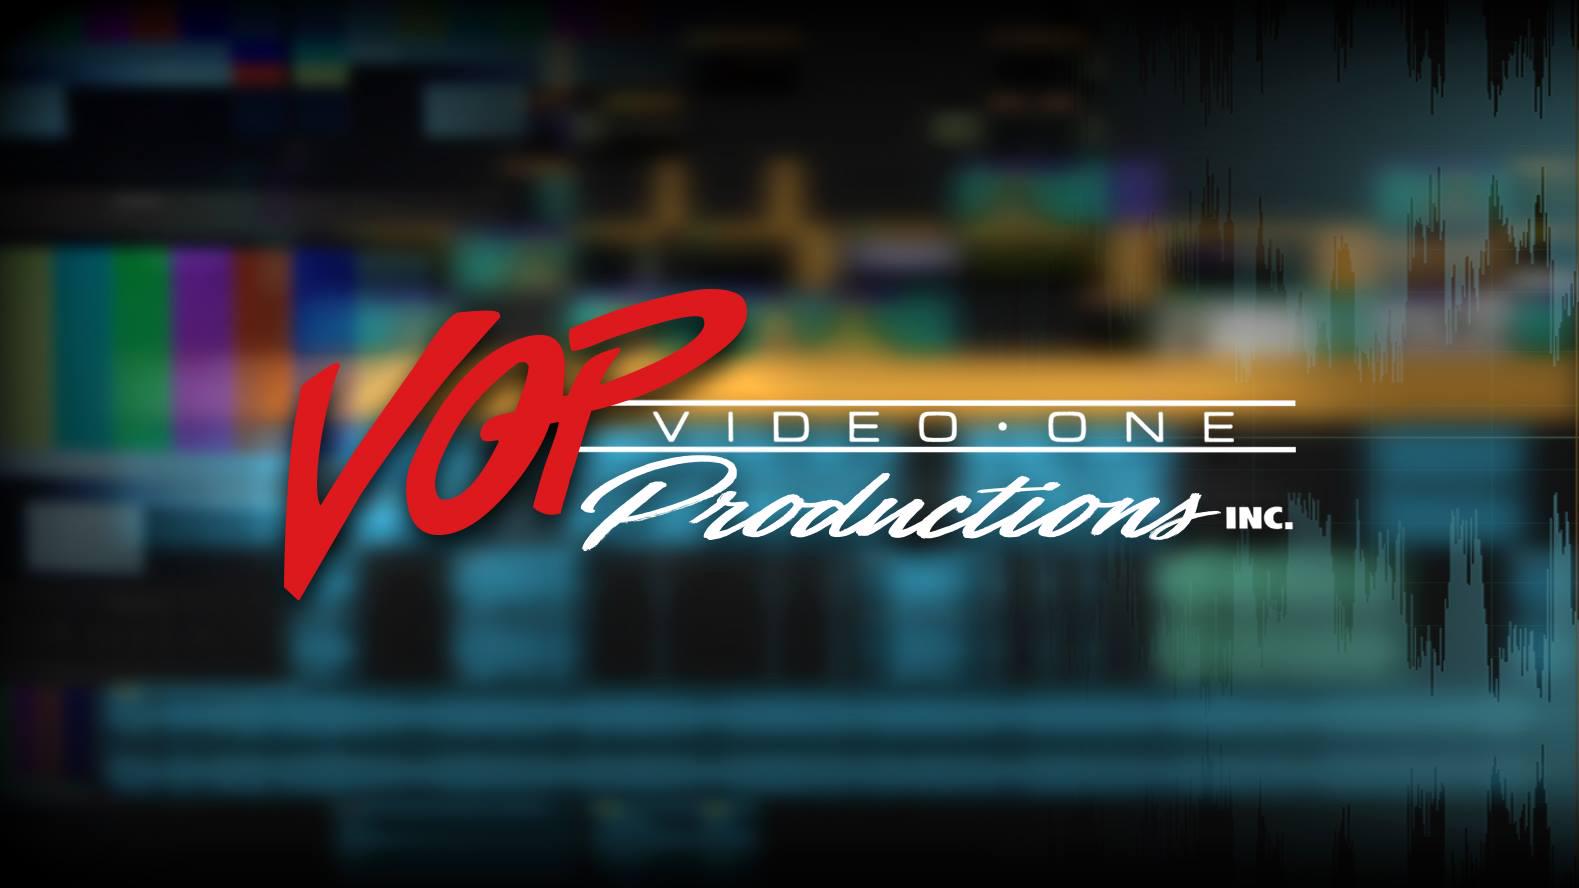 Video One Productions, Inc. profile on Qualified.One